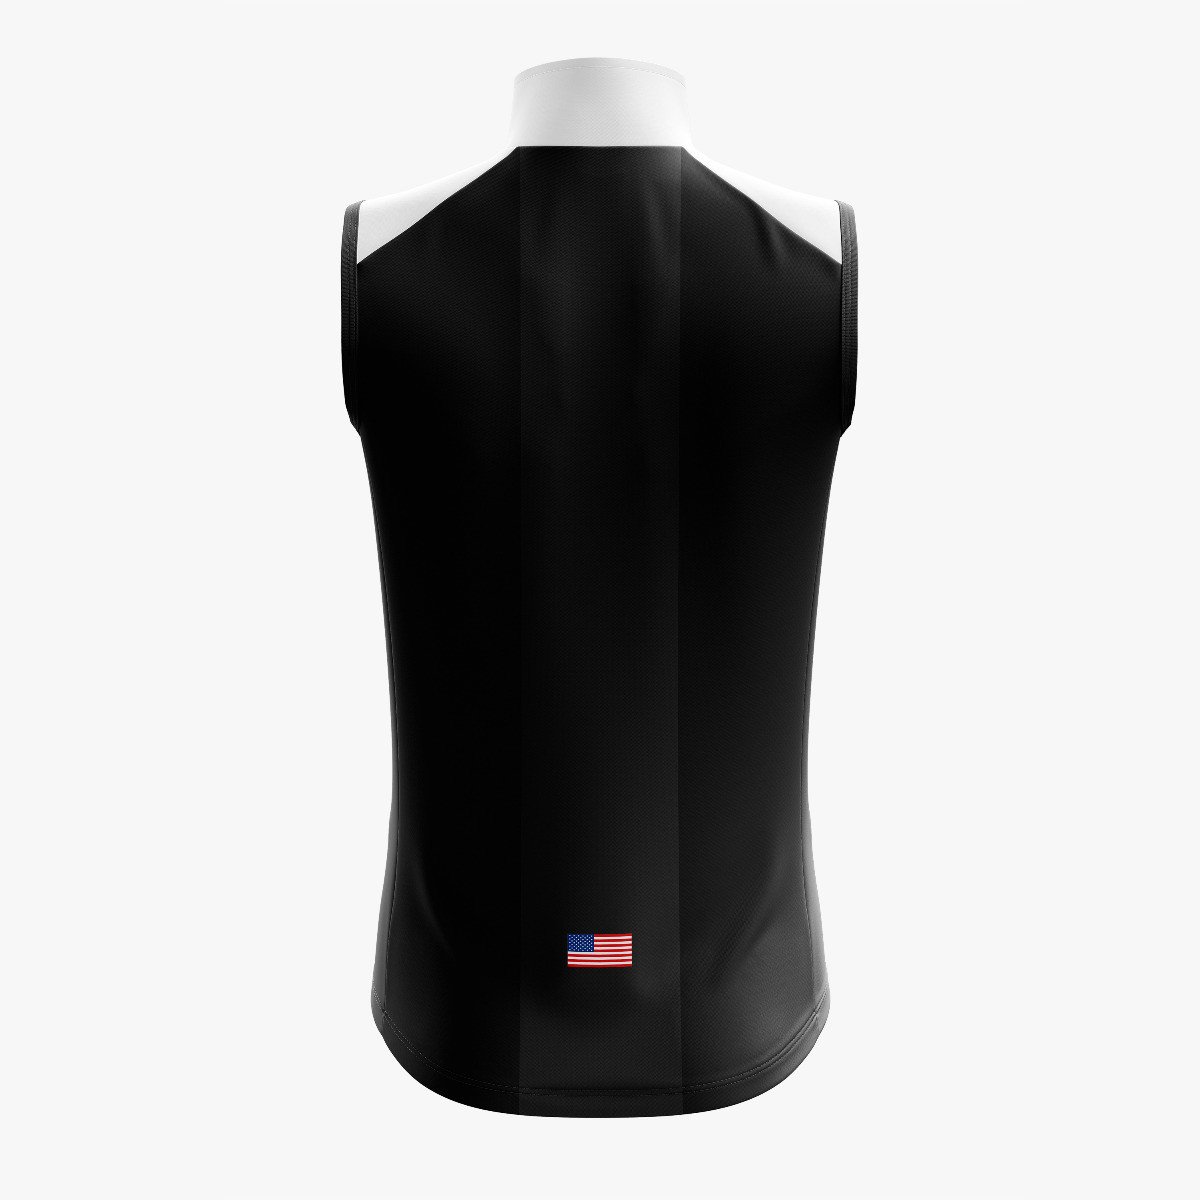 scicon-x-space-agency-cycling-wind-vest-10-black-wv11011